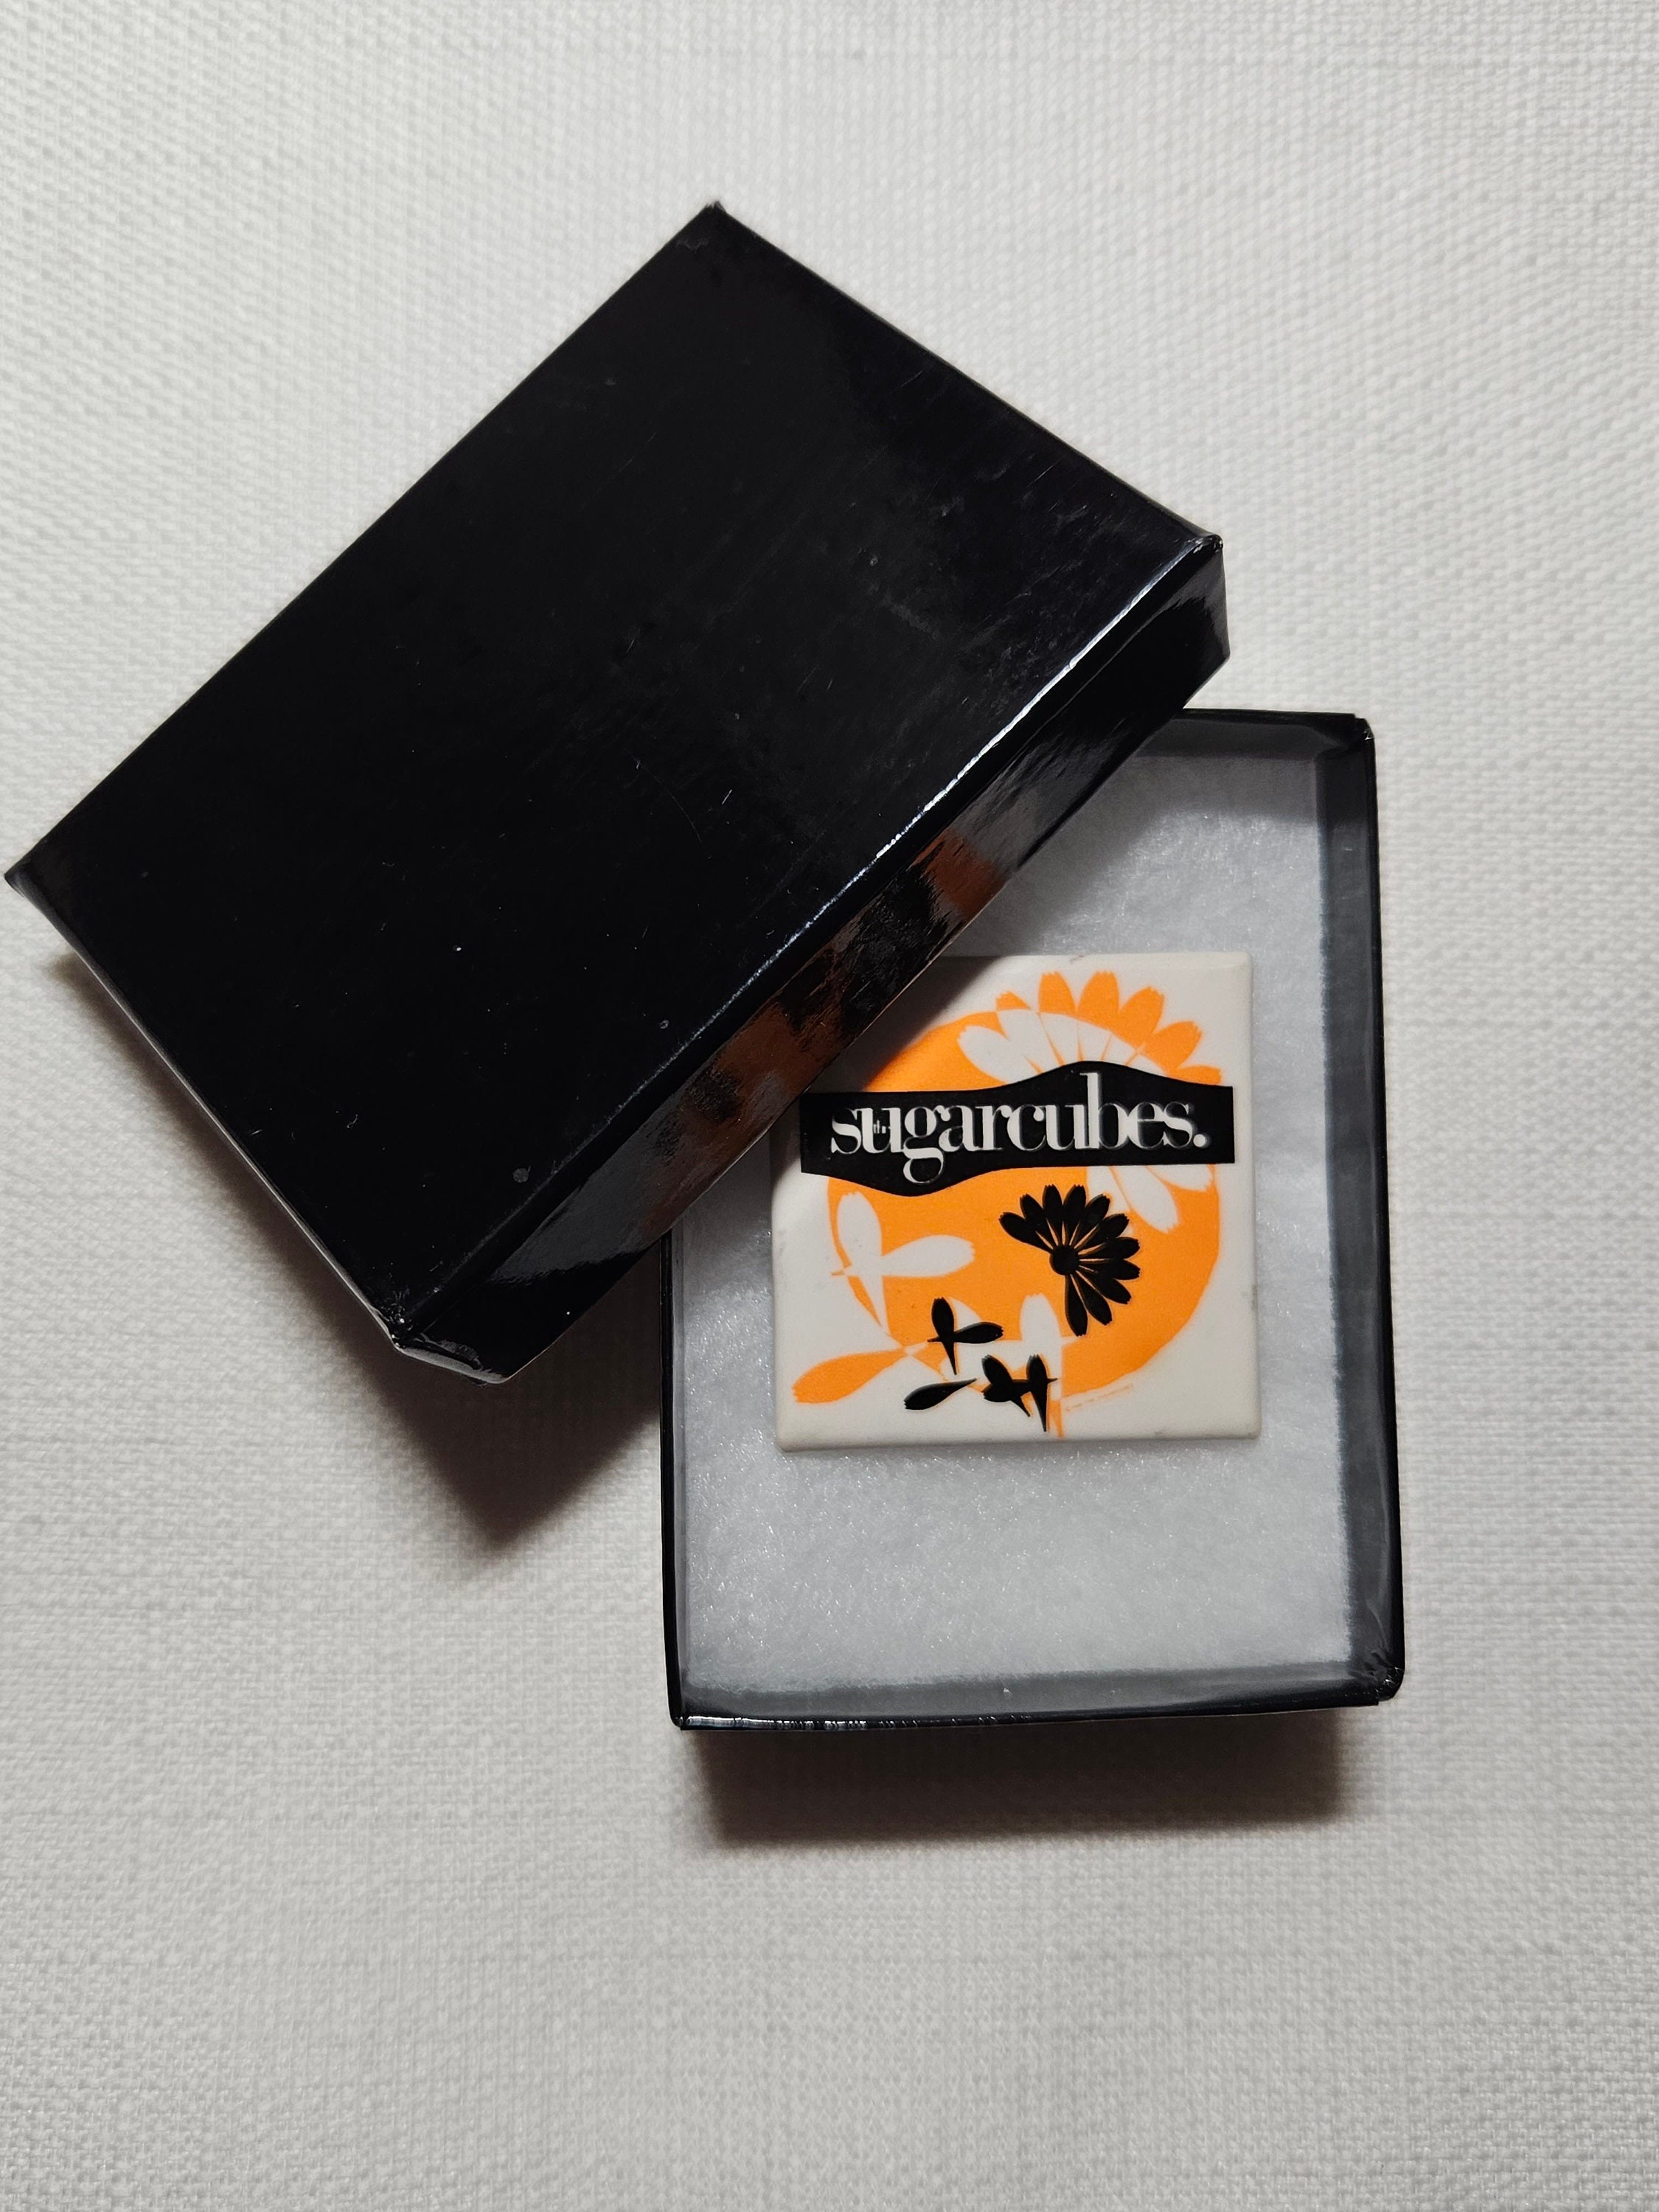 the sugarcubes (björk) band pins! the price stated - Depop